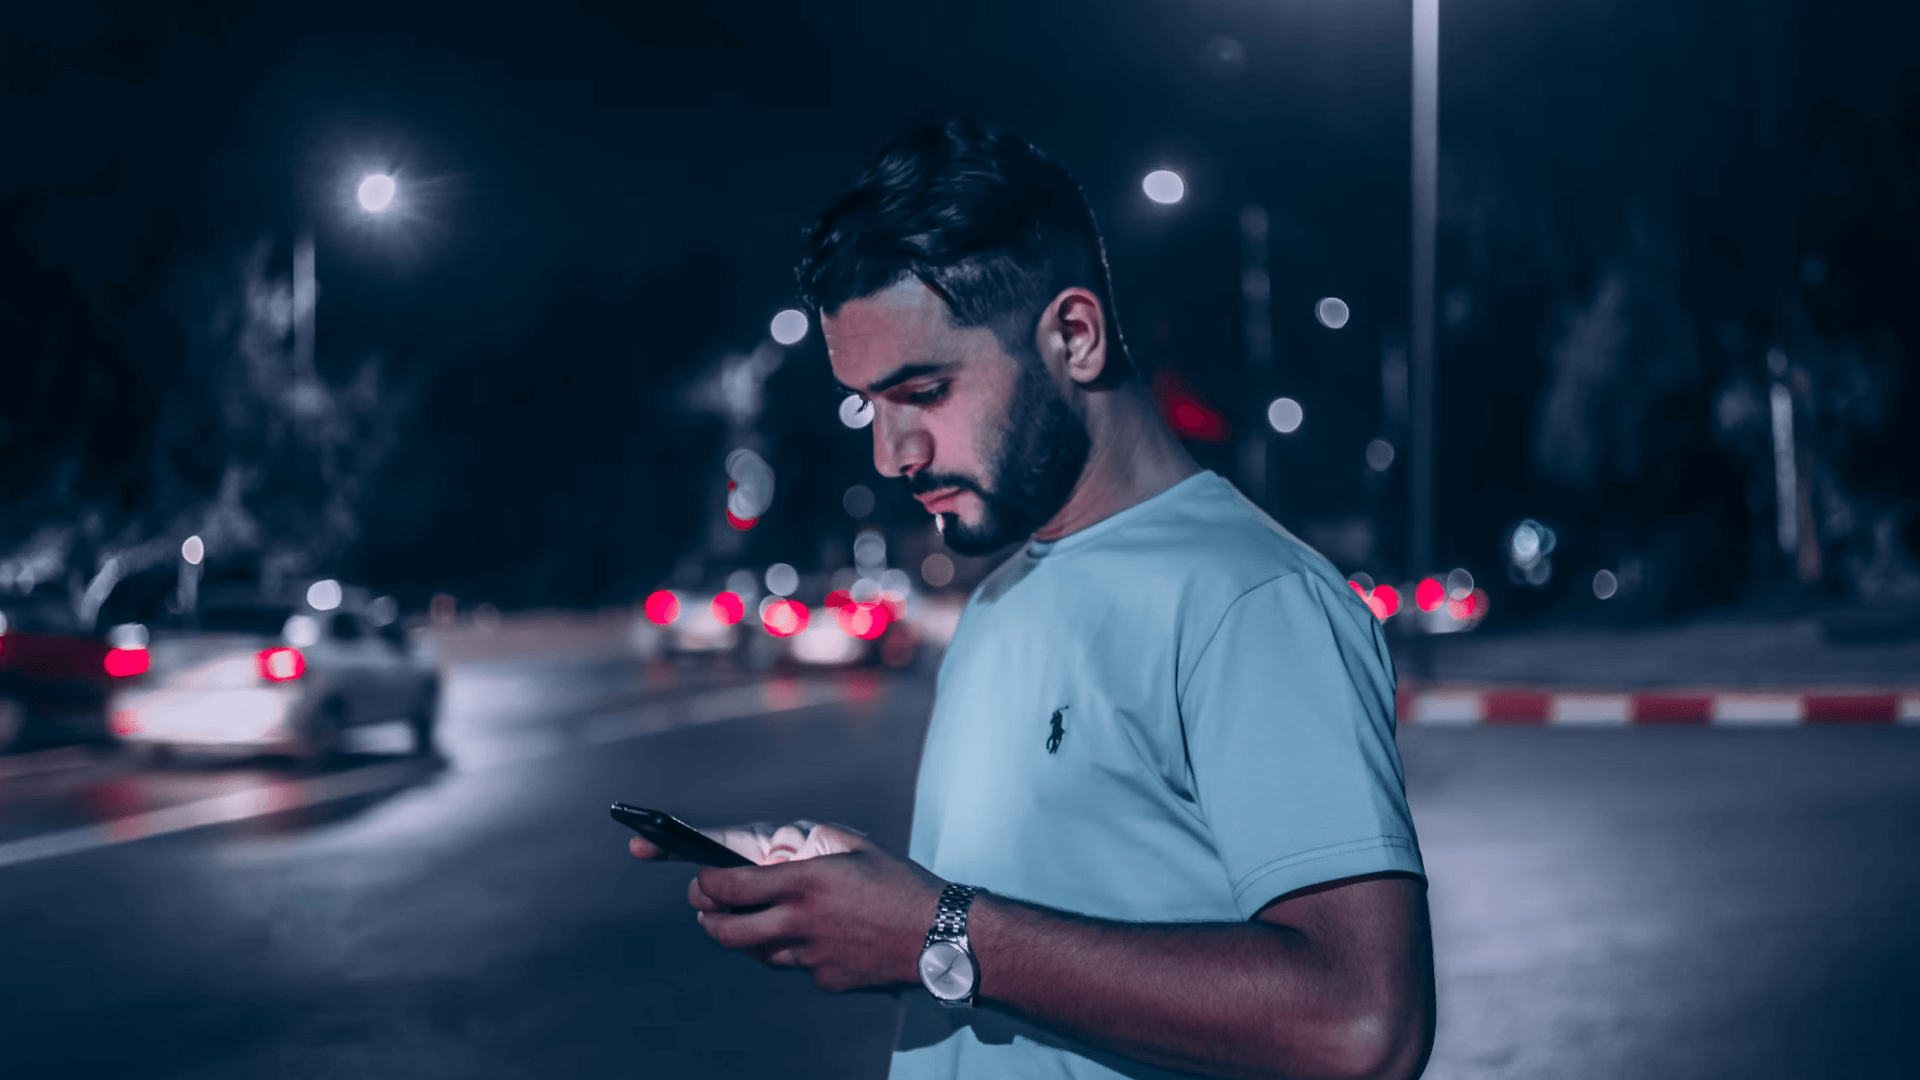 A young man standing in a parking lot at night looking at his phone